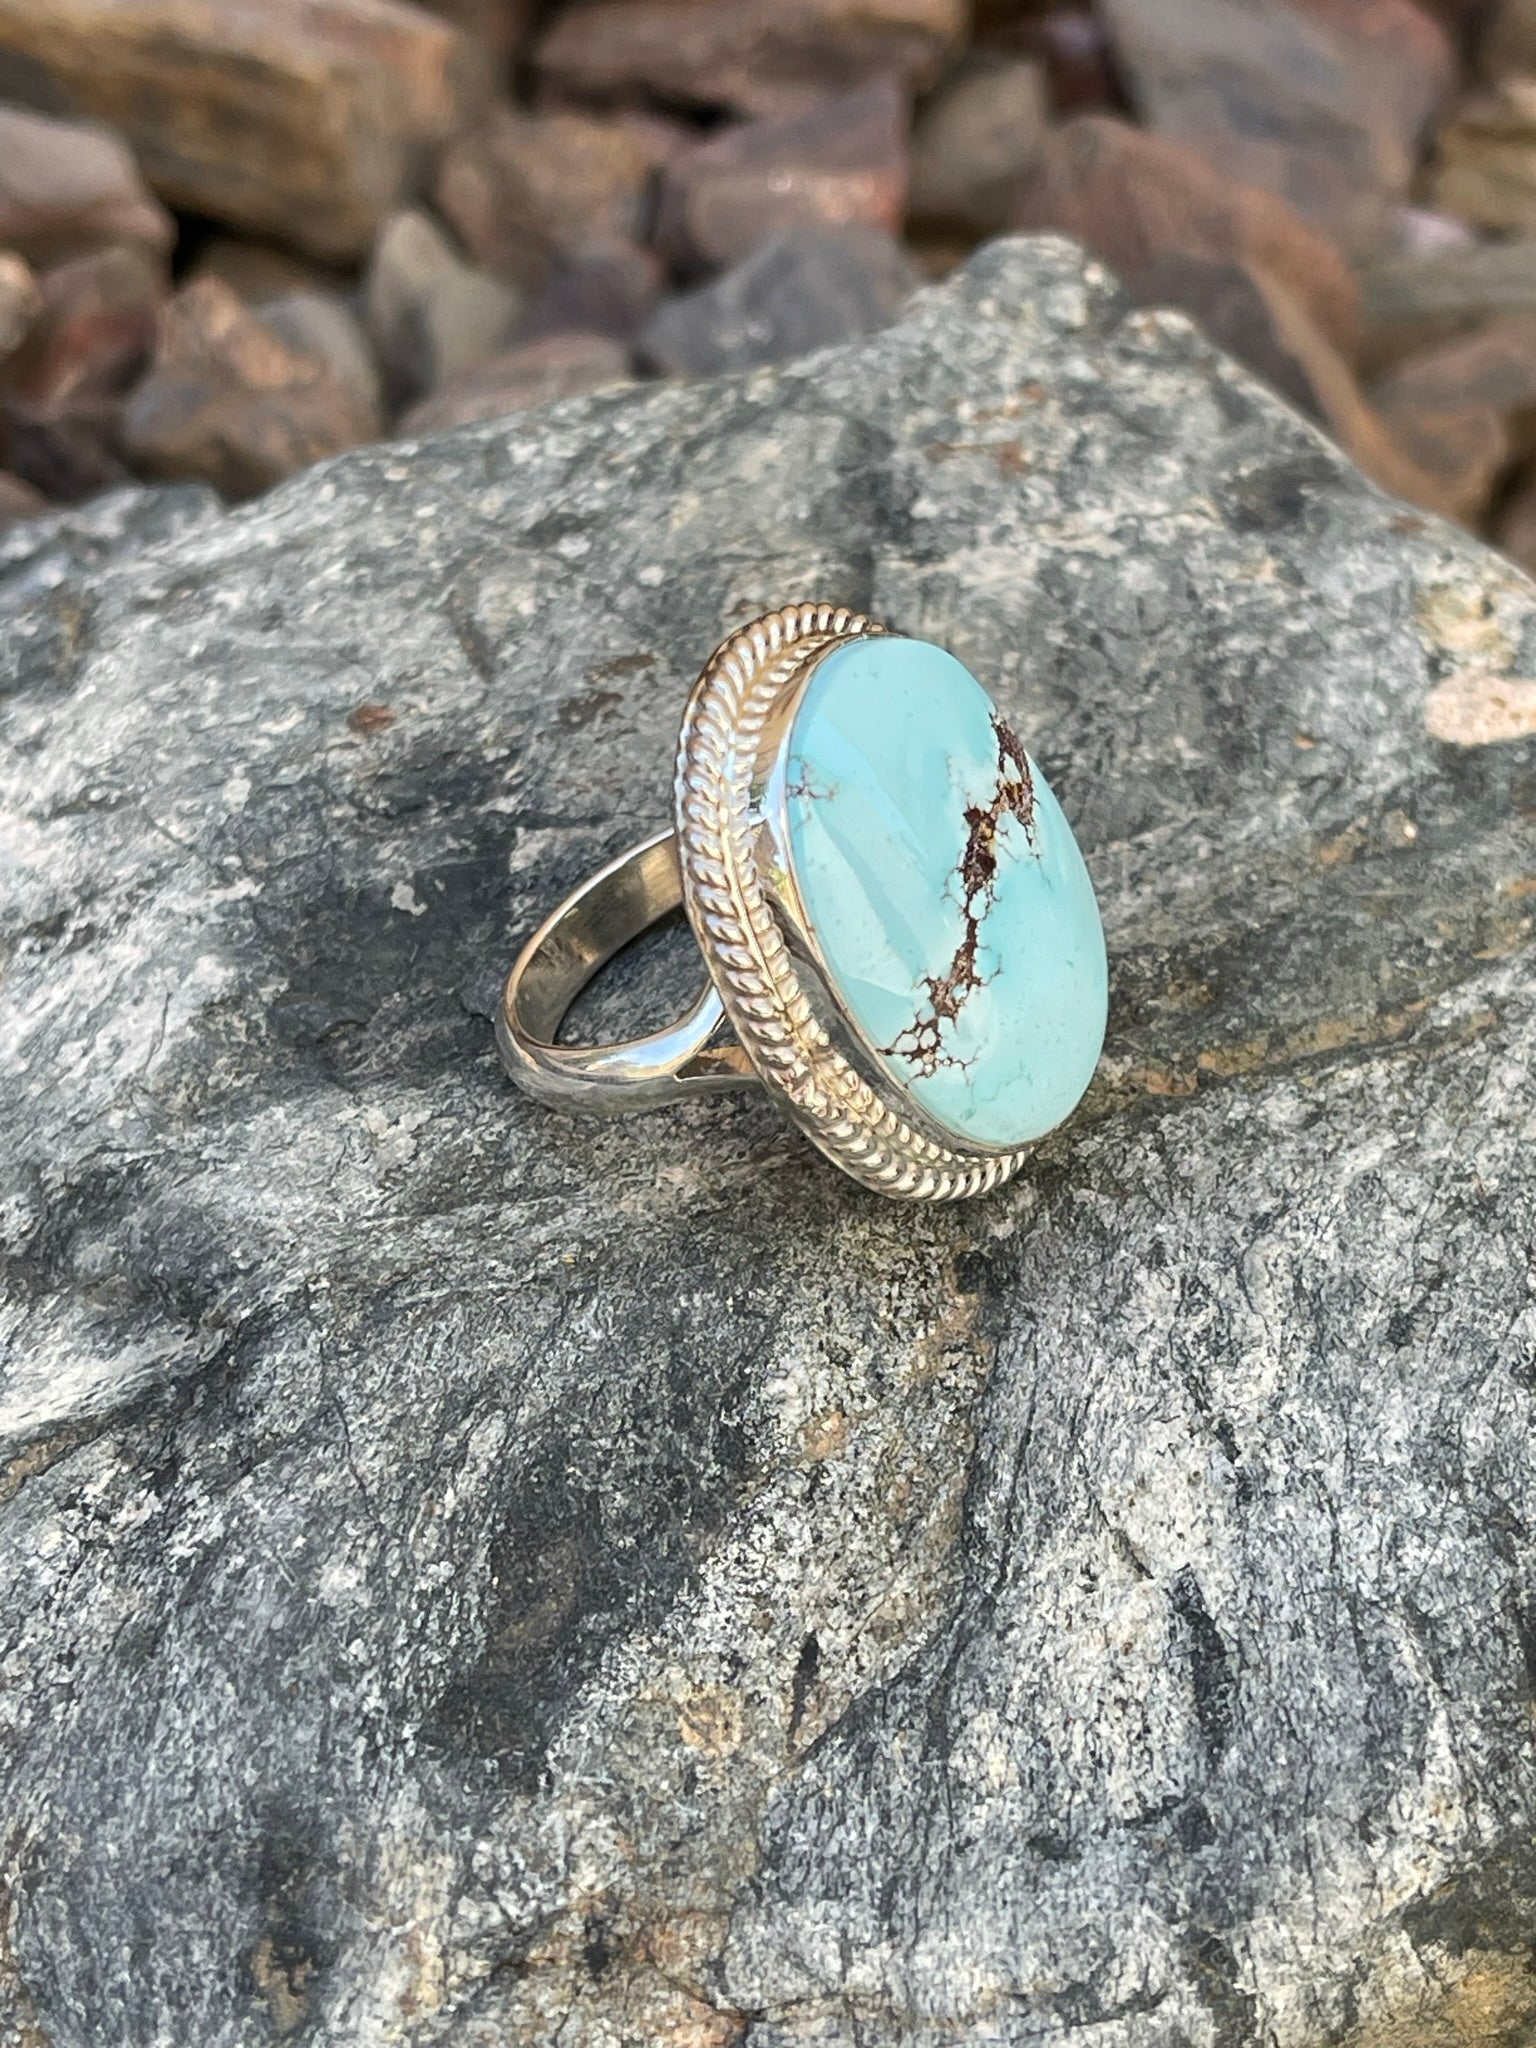 Handmade Solid Sterling Silver Golden Hill Turquoise Ring with Twist Trim - Size 9